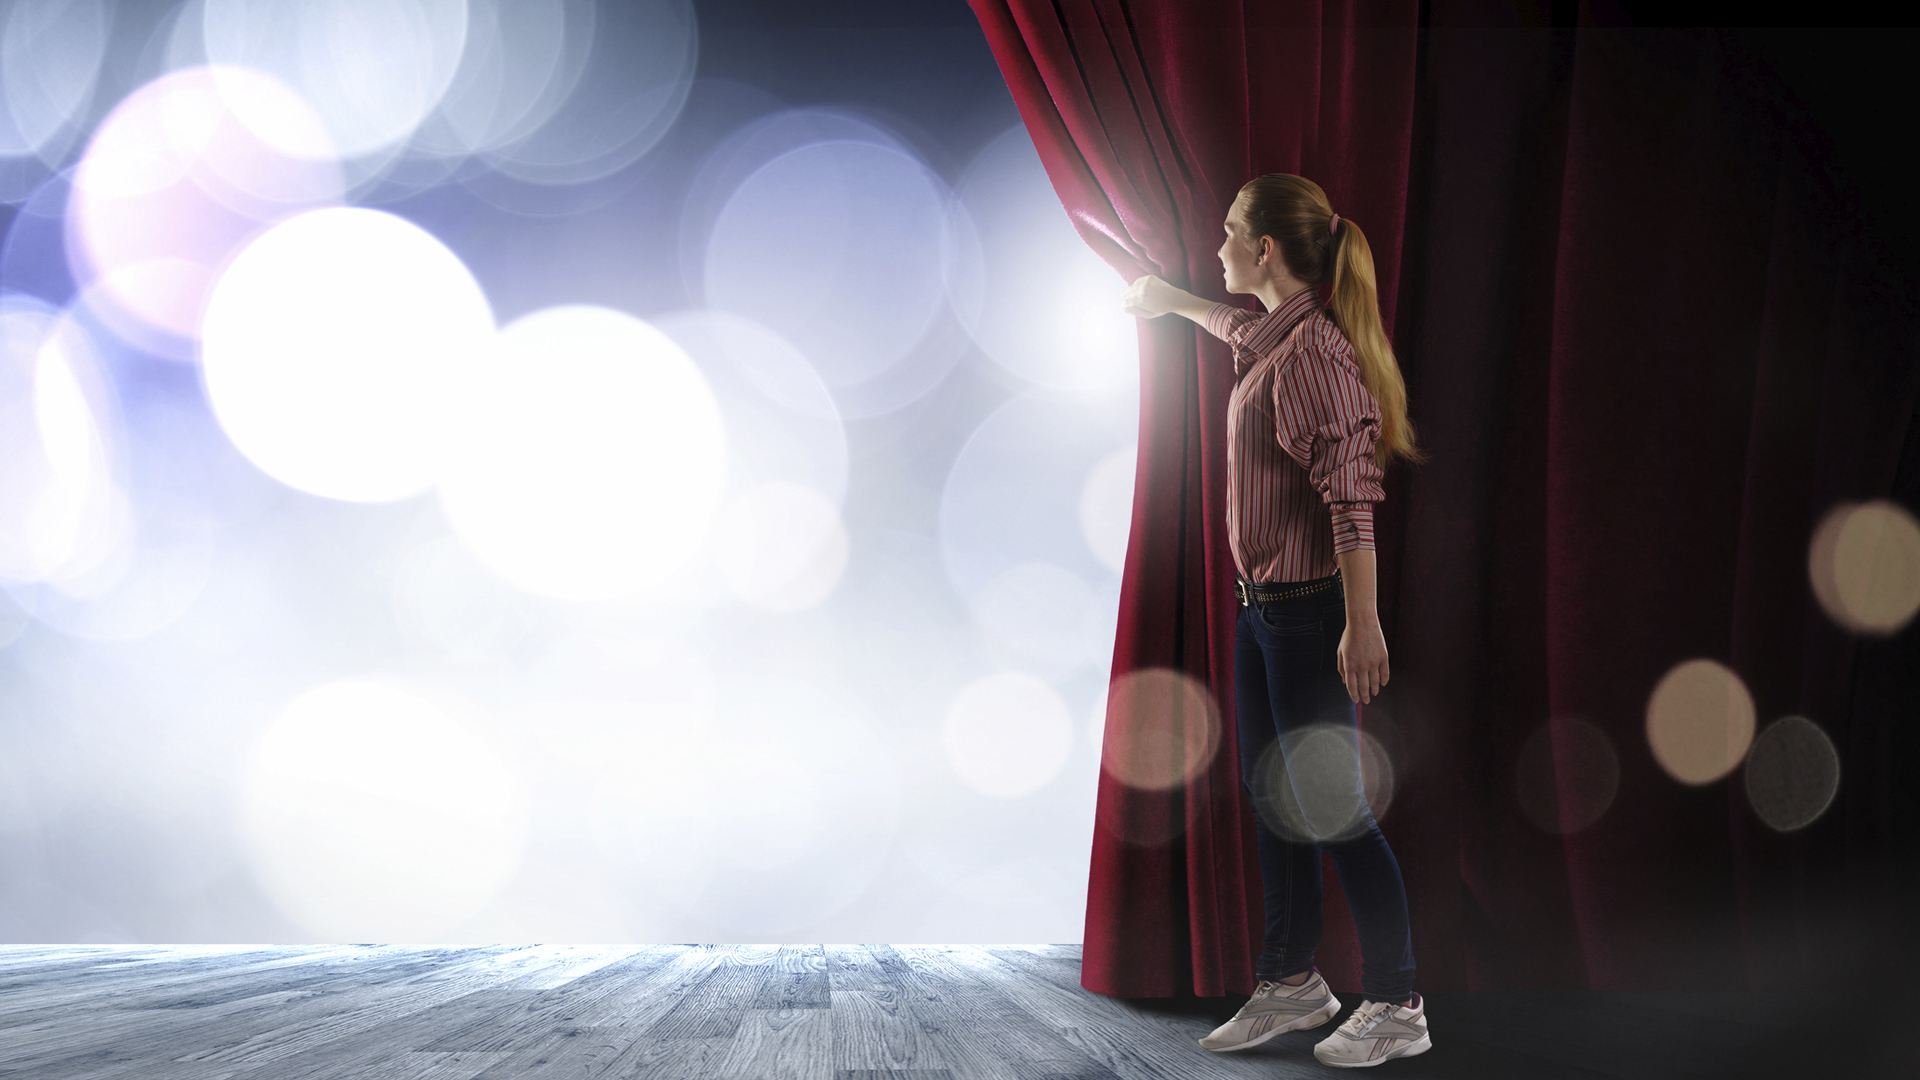 An actor on stage behind a red velvet curtain